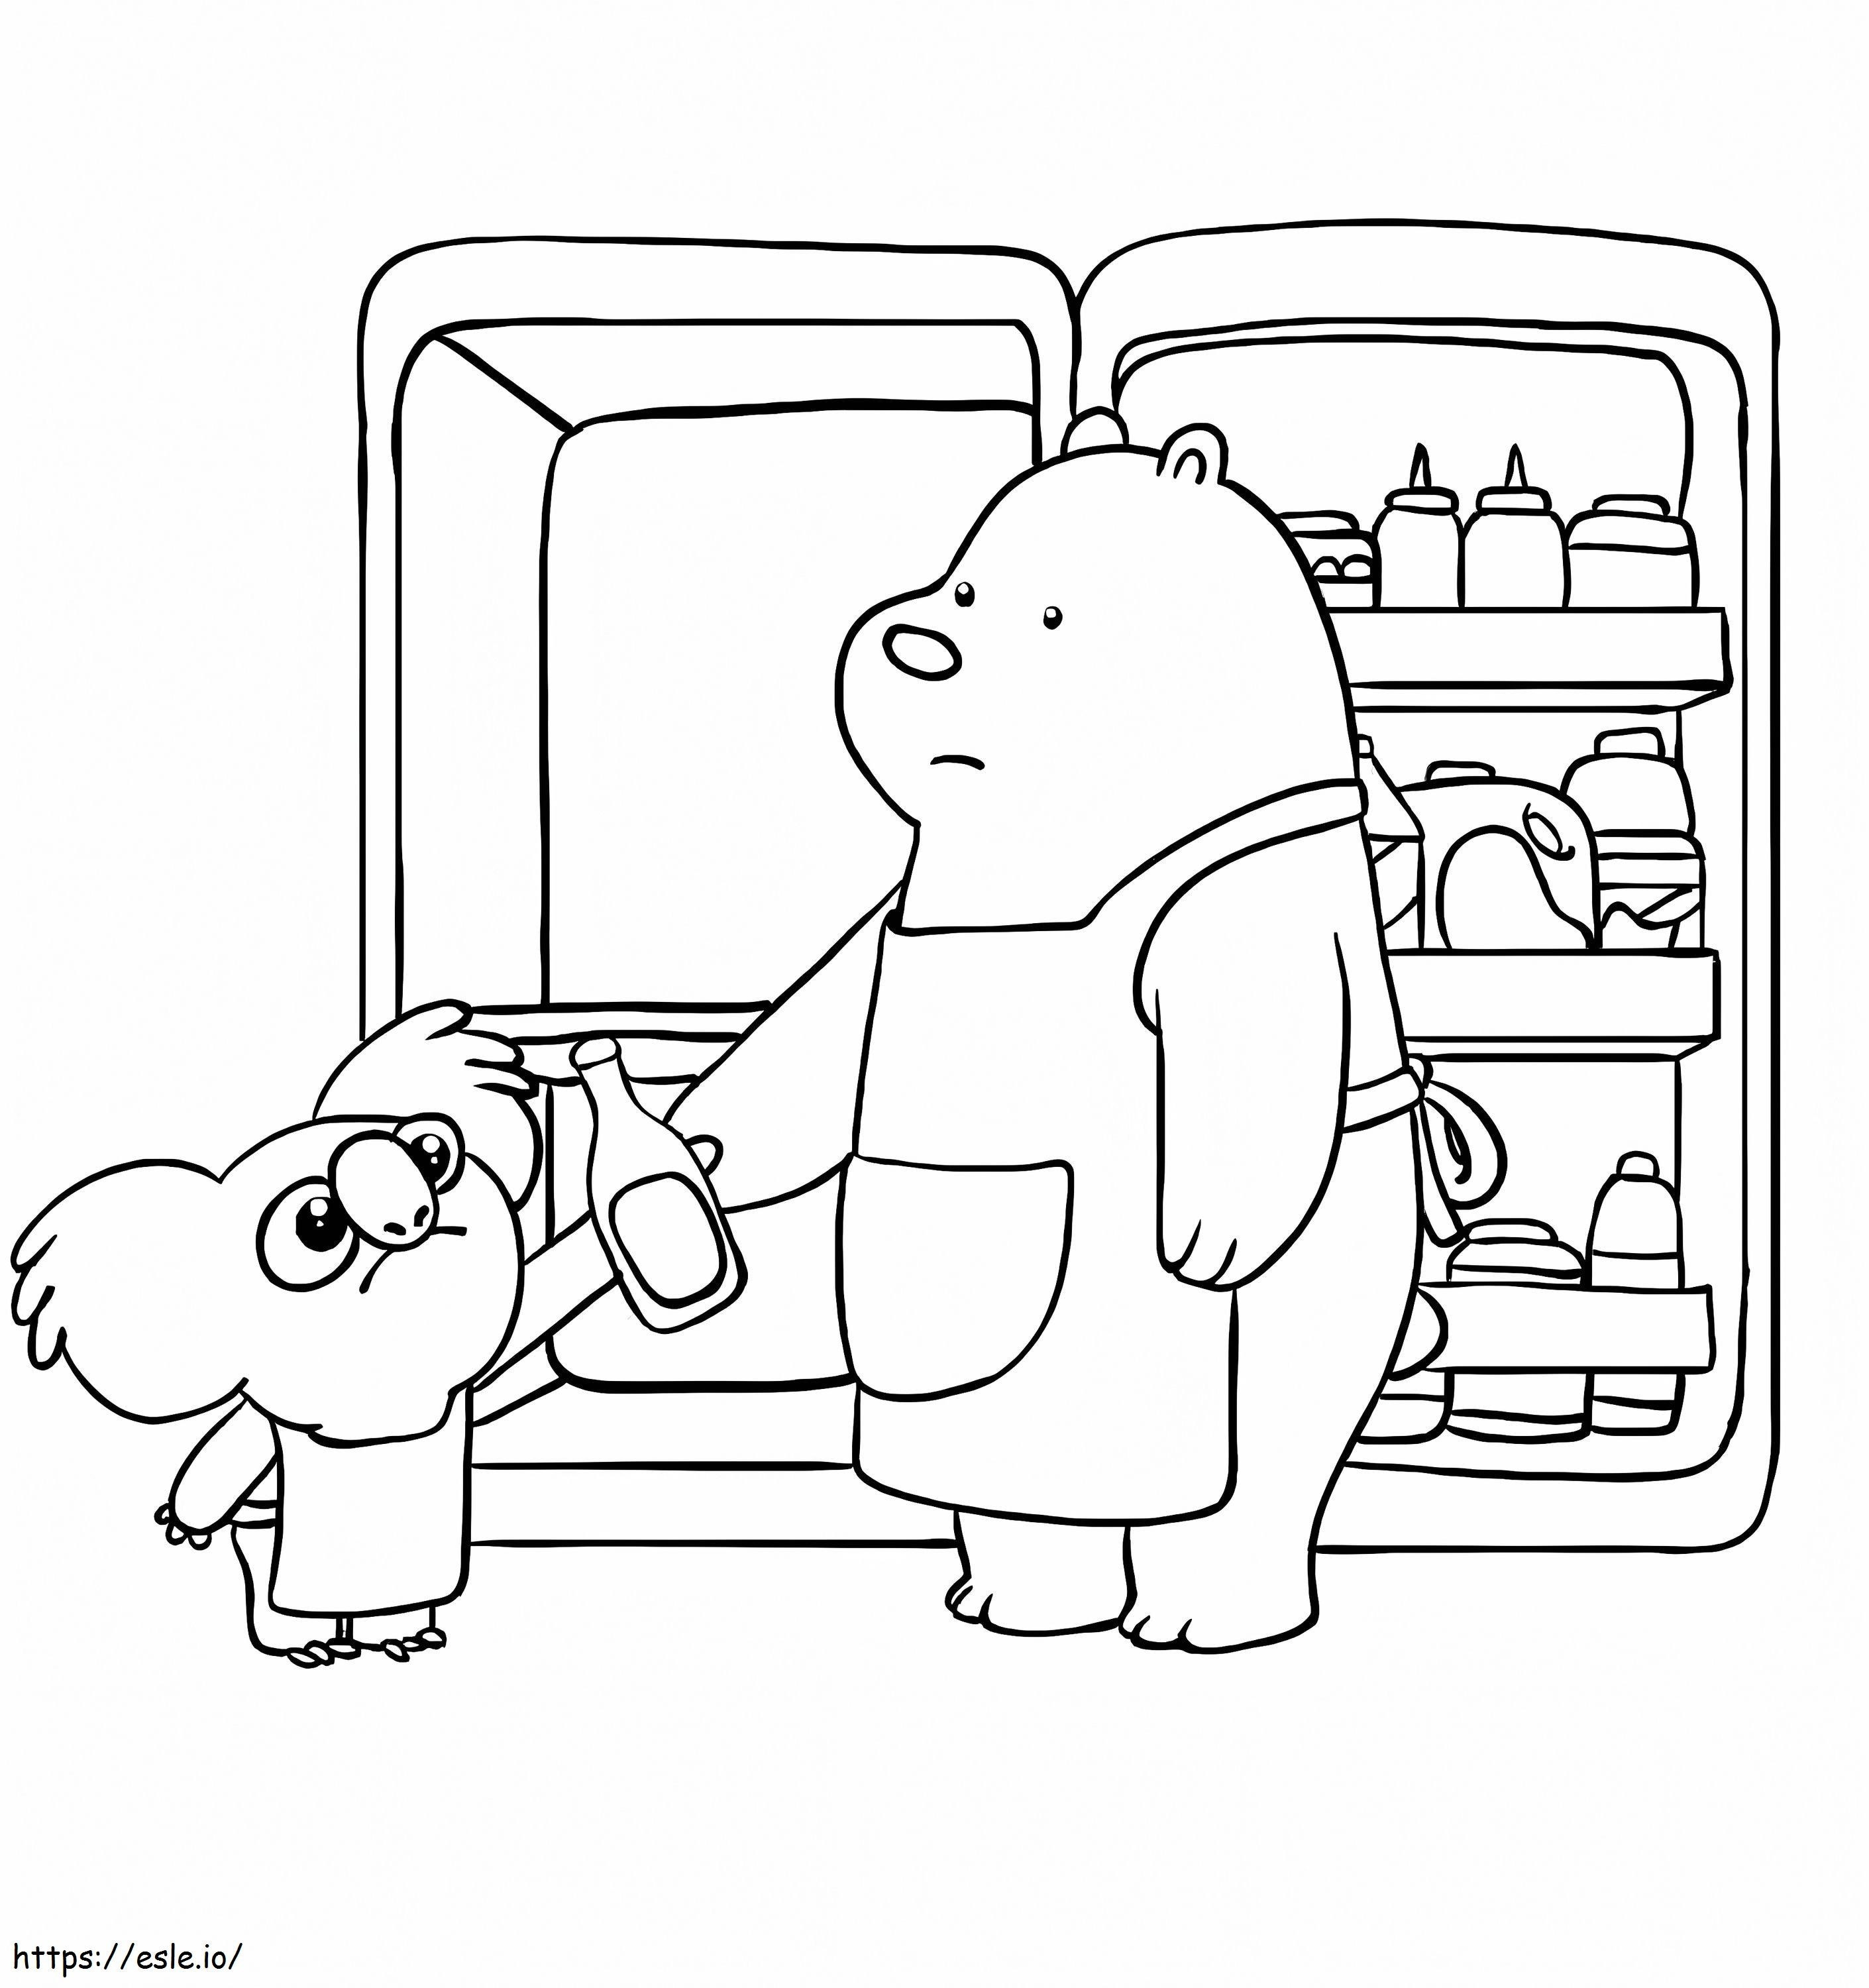 Ice Bear And Nom Nom In The Kitchen coloring page